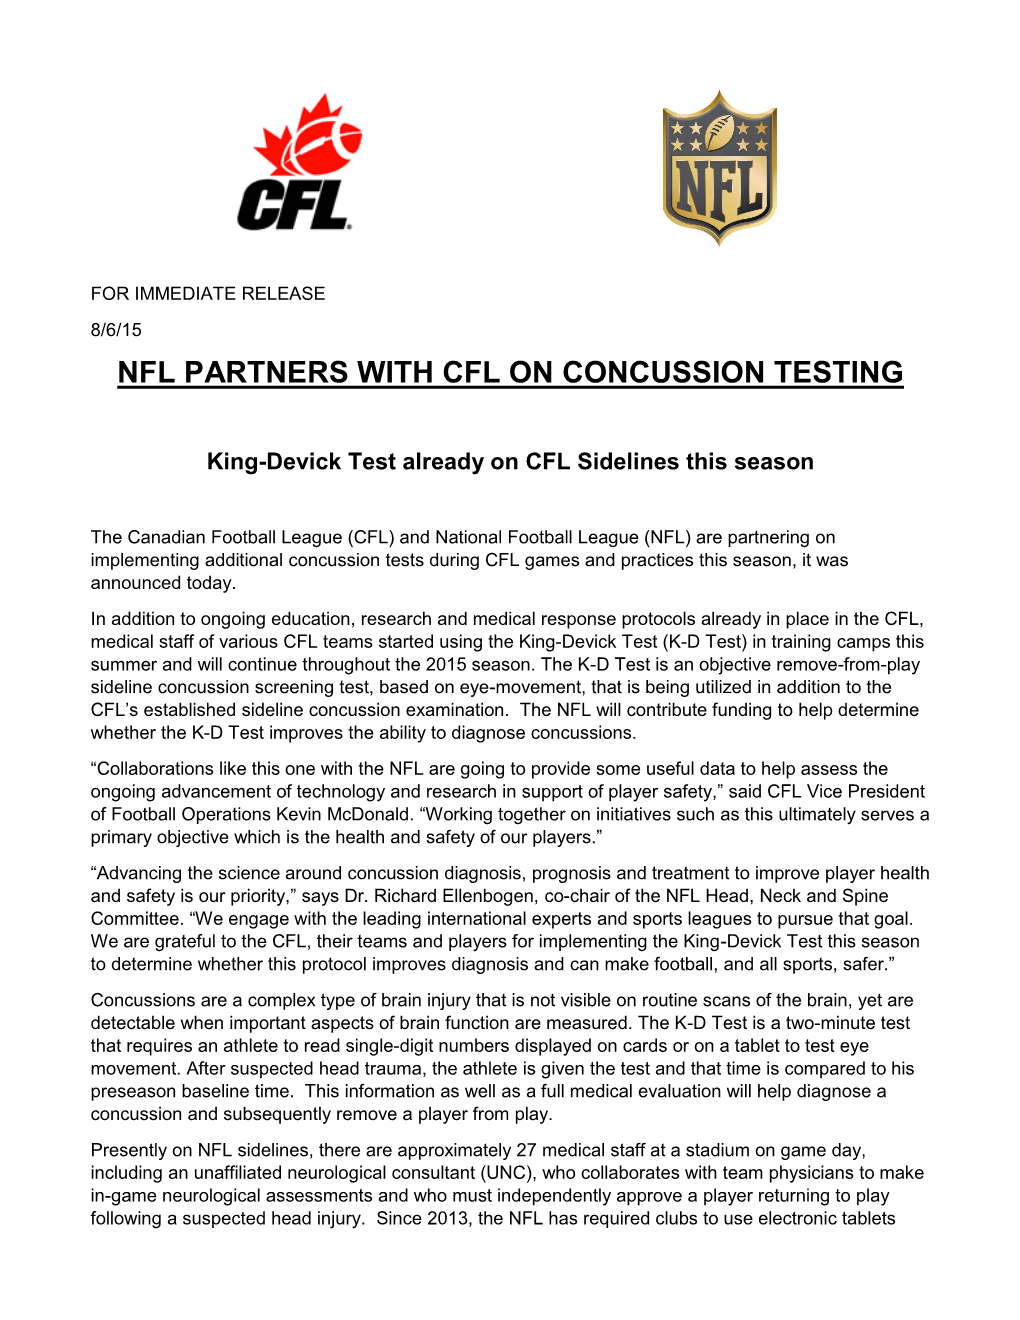 Nfl Partners with Cfl on Concussion Testing